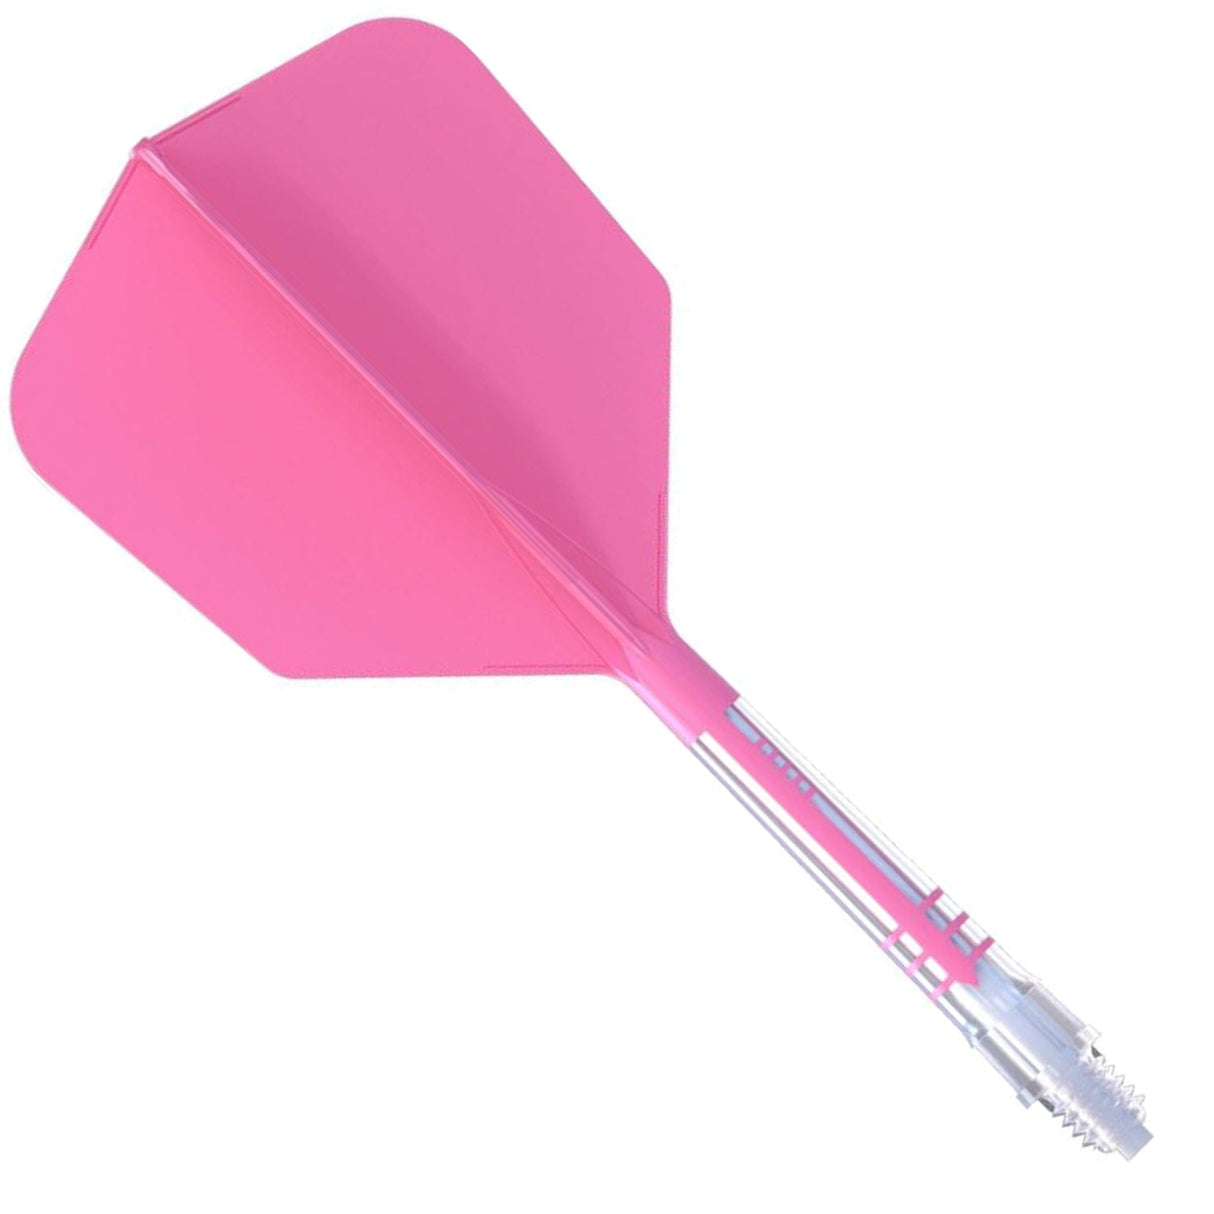 Cuesoul Rost T19 Carbon Fibre - Integrated Dart Shaft and Flights - Big Wing - Pink Size 5